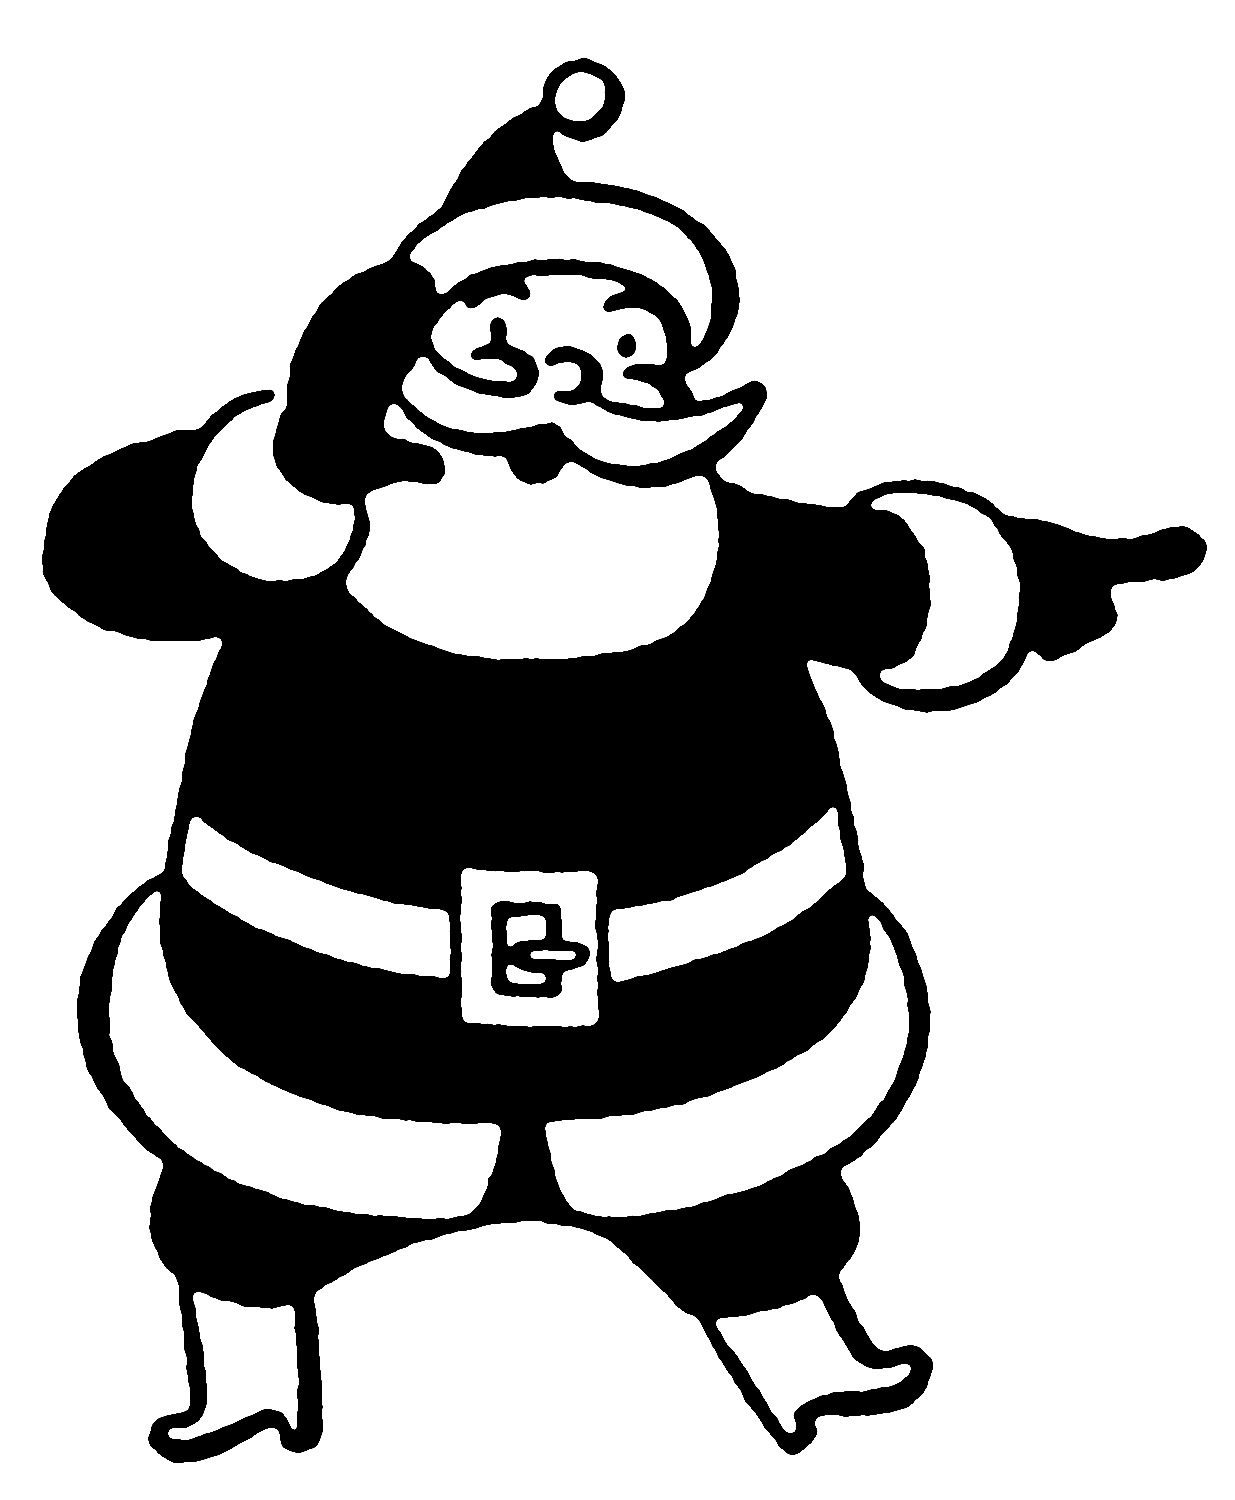 Free father christmas clipart black and white